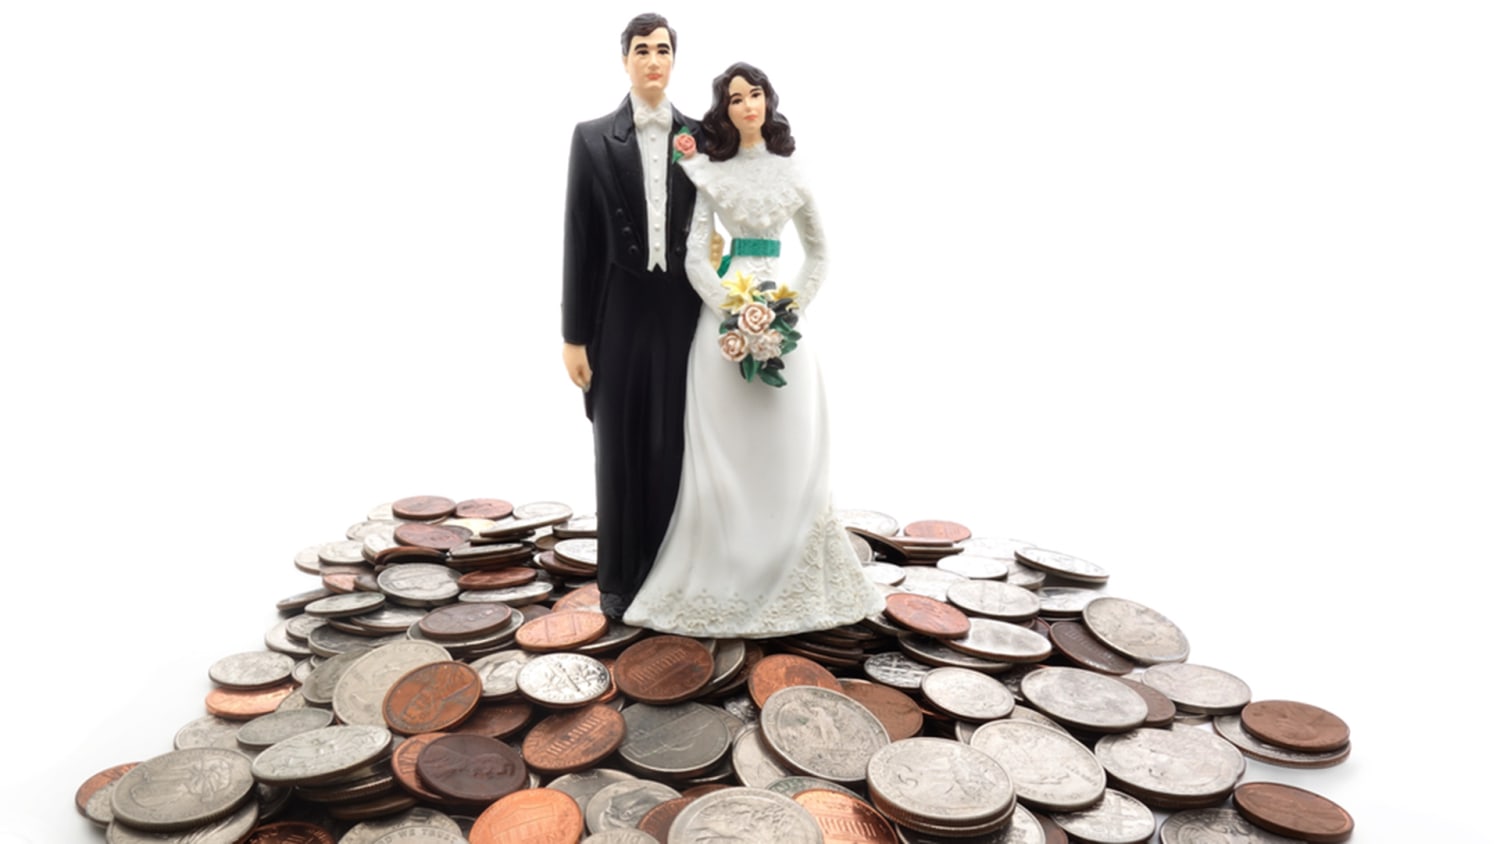 Things You Should Never Spend Money on for a Wedding — Experts Reveal